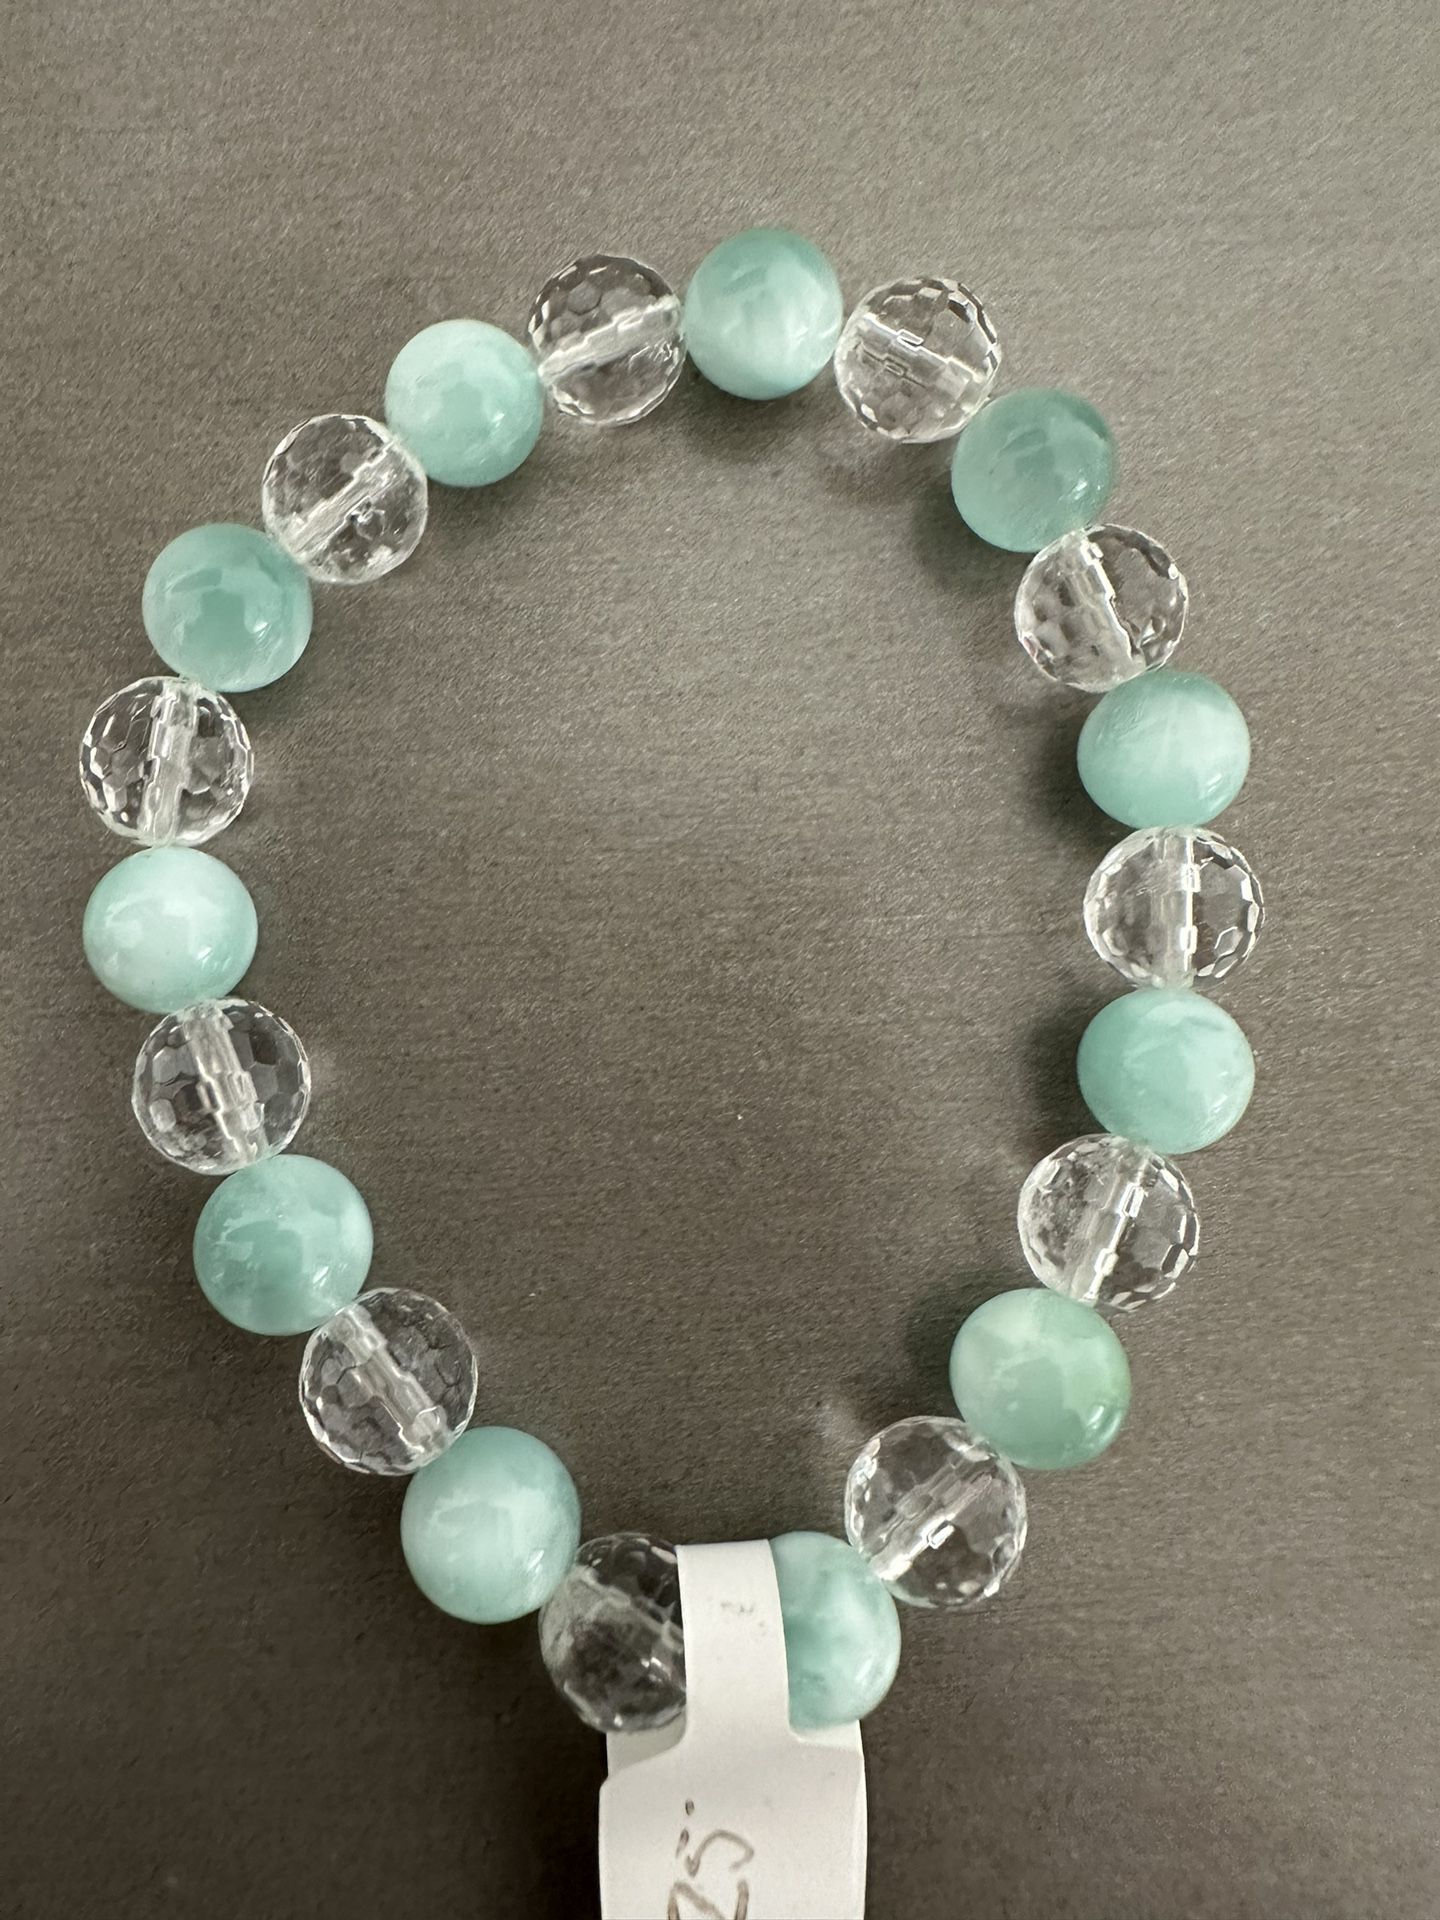 New, Beautiful Green Moonstone And Faceted Clear Quartz Crystal Bracelet. Gift Bag Included 